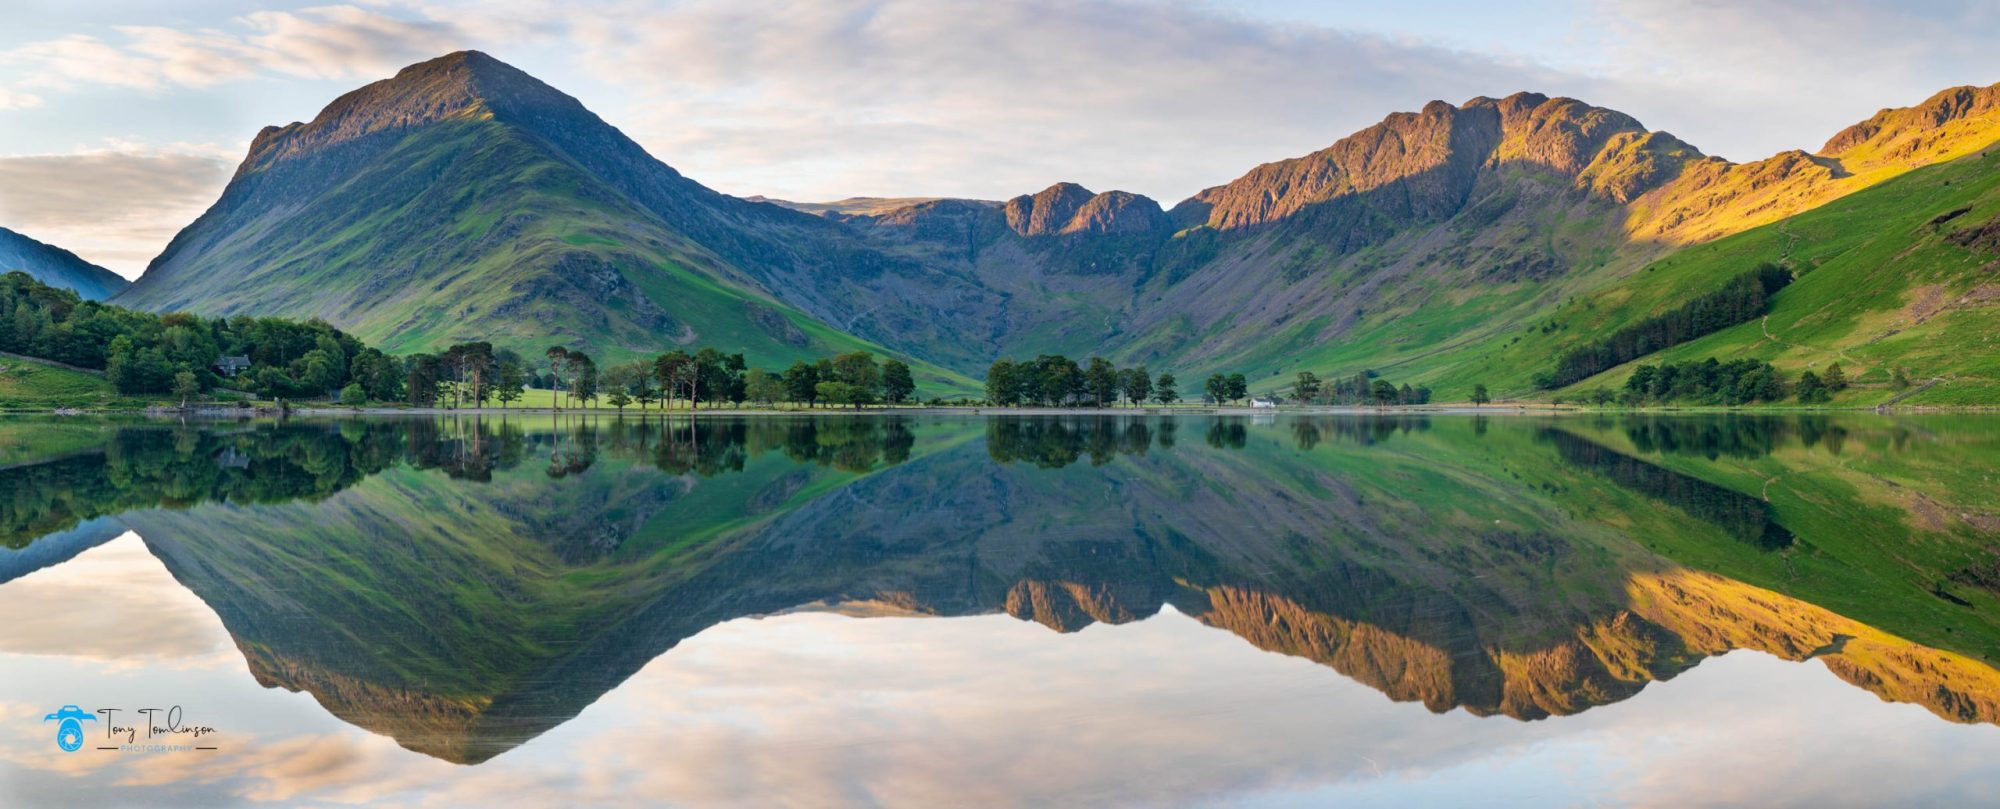 tony-tomlinson-photography-buttermere-lake-district-reflections-landscape-2000x809